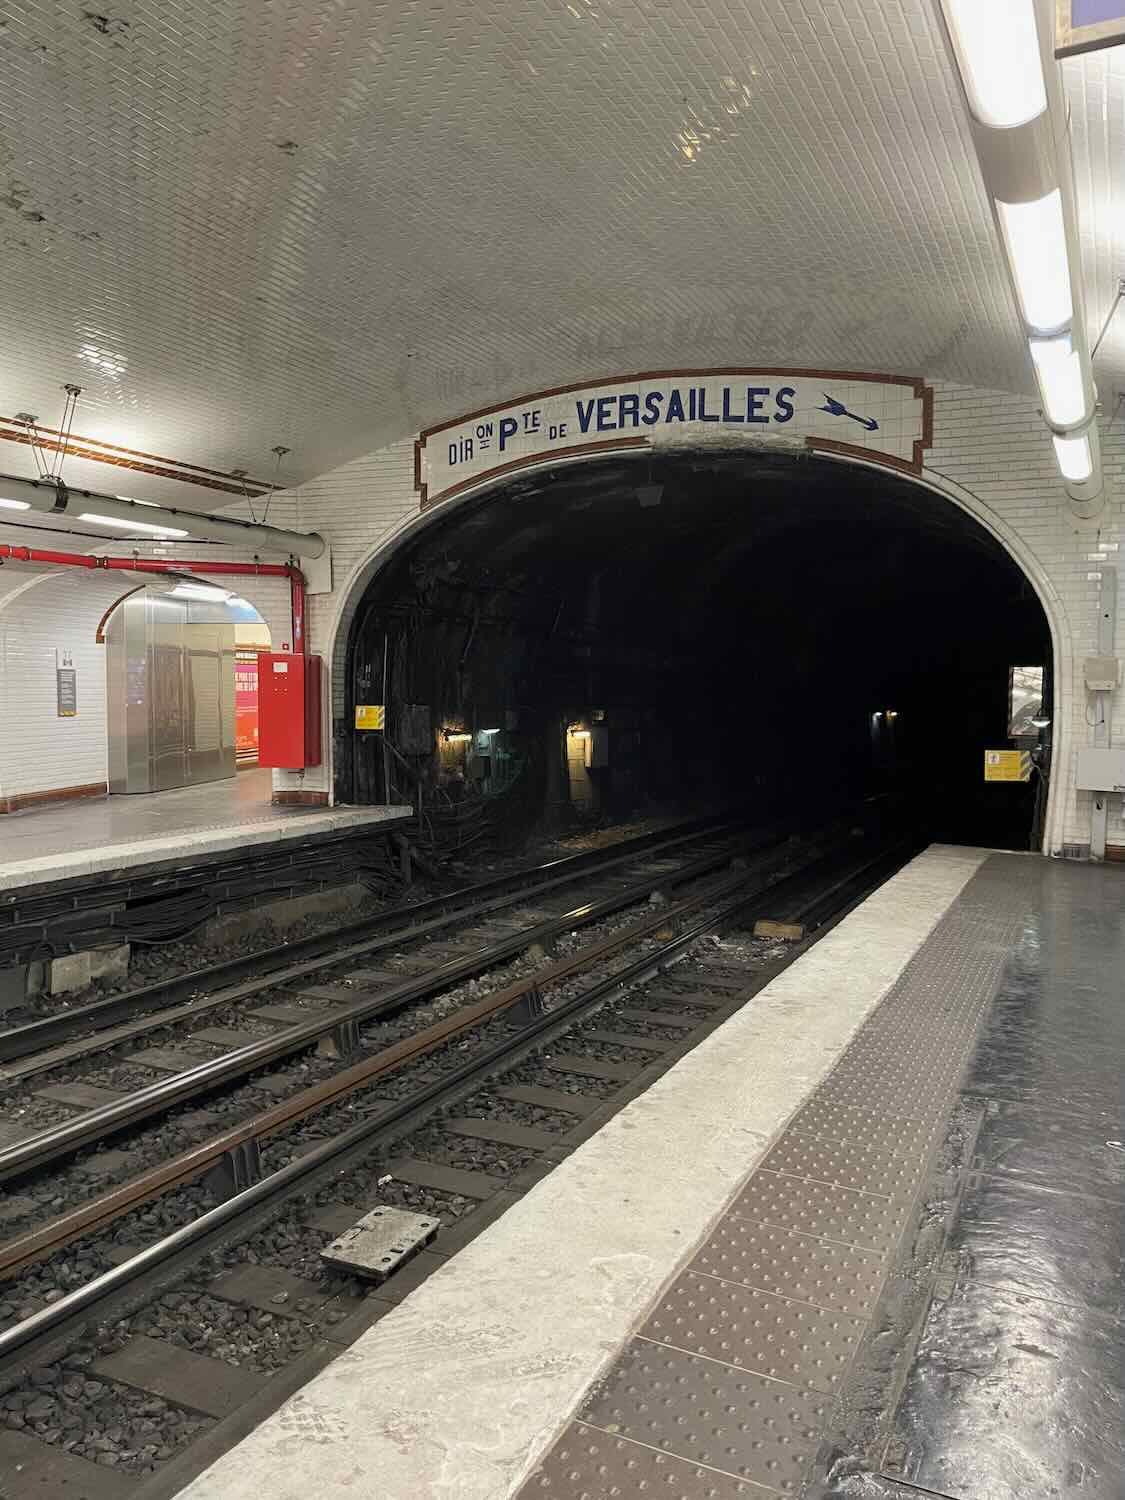 An empty platform at a Paris metro station with "Direction Pt de Versailles" sign, typical white metro tiles, and tracks leading into a dark tunnel, embodying the everyday commute in the city.